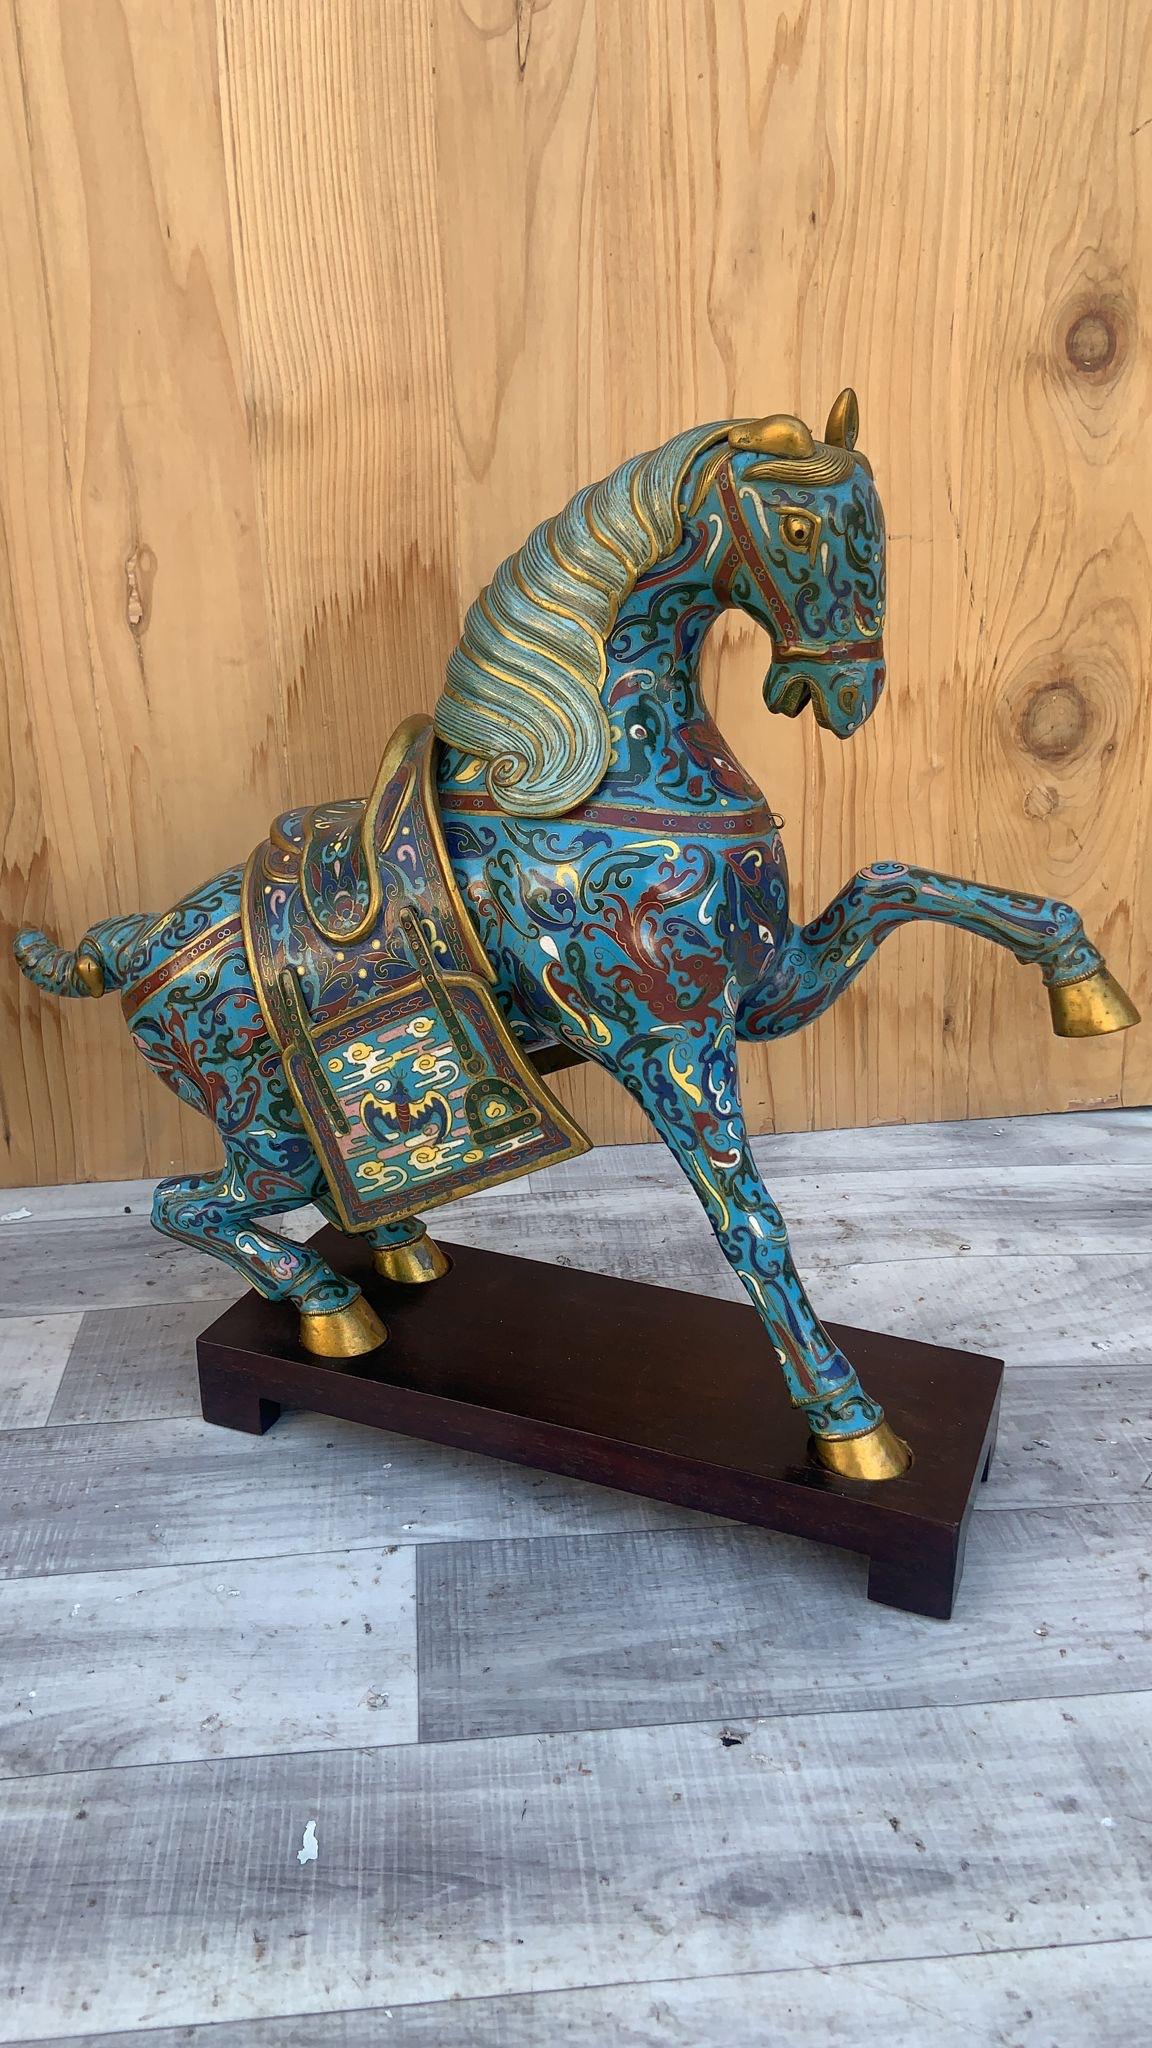 Chinese Export Vintage Chinese Cloisonné War Horse Sculptures on Mahogany Base - Pair For Sale